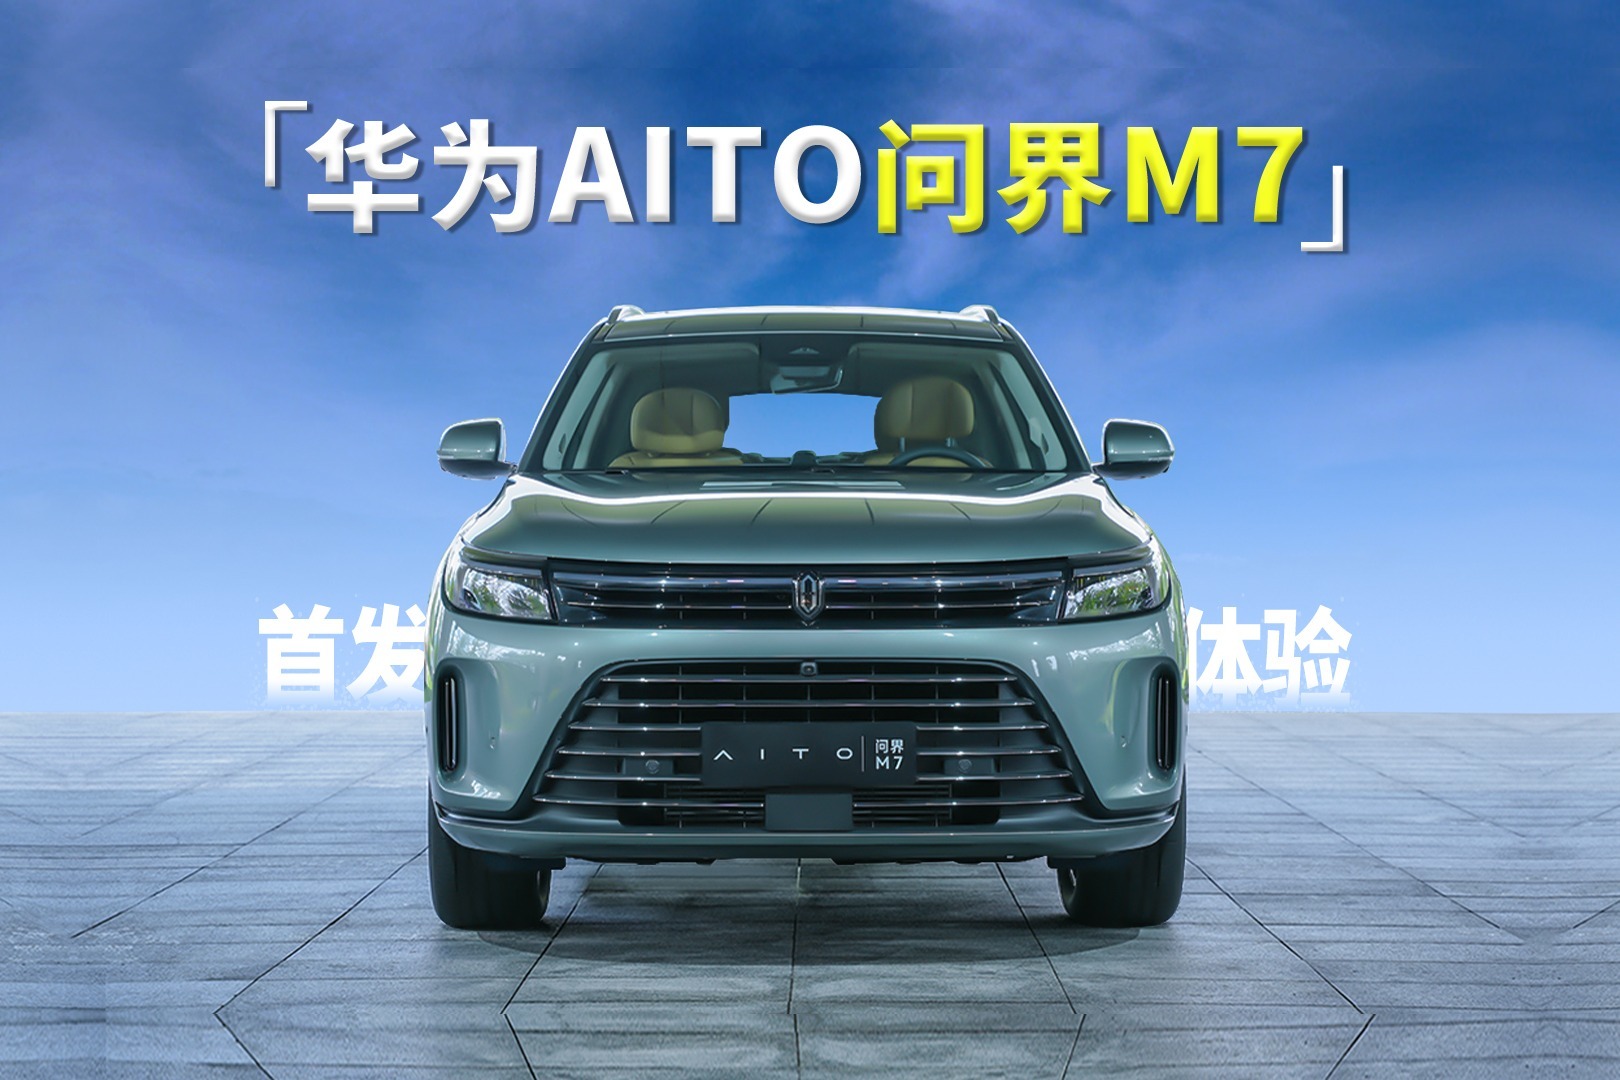 AITO M7 is officially launched - luxury SUV from Huawei - ArenaEV